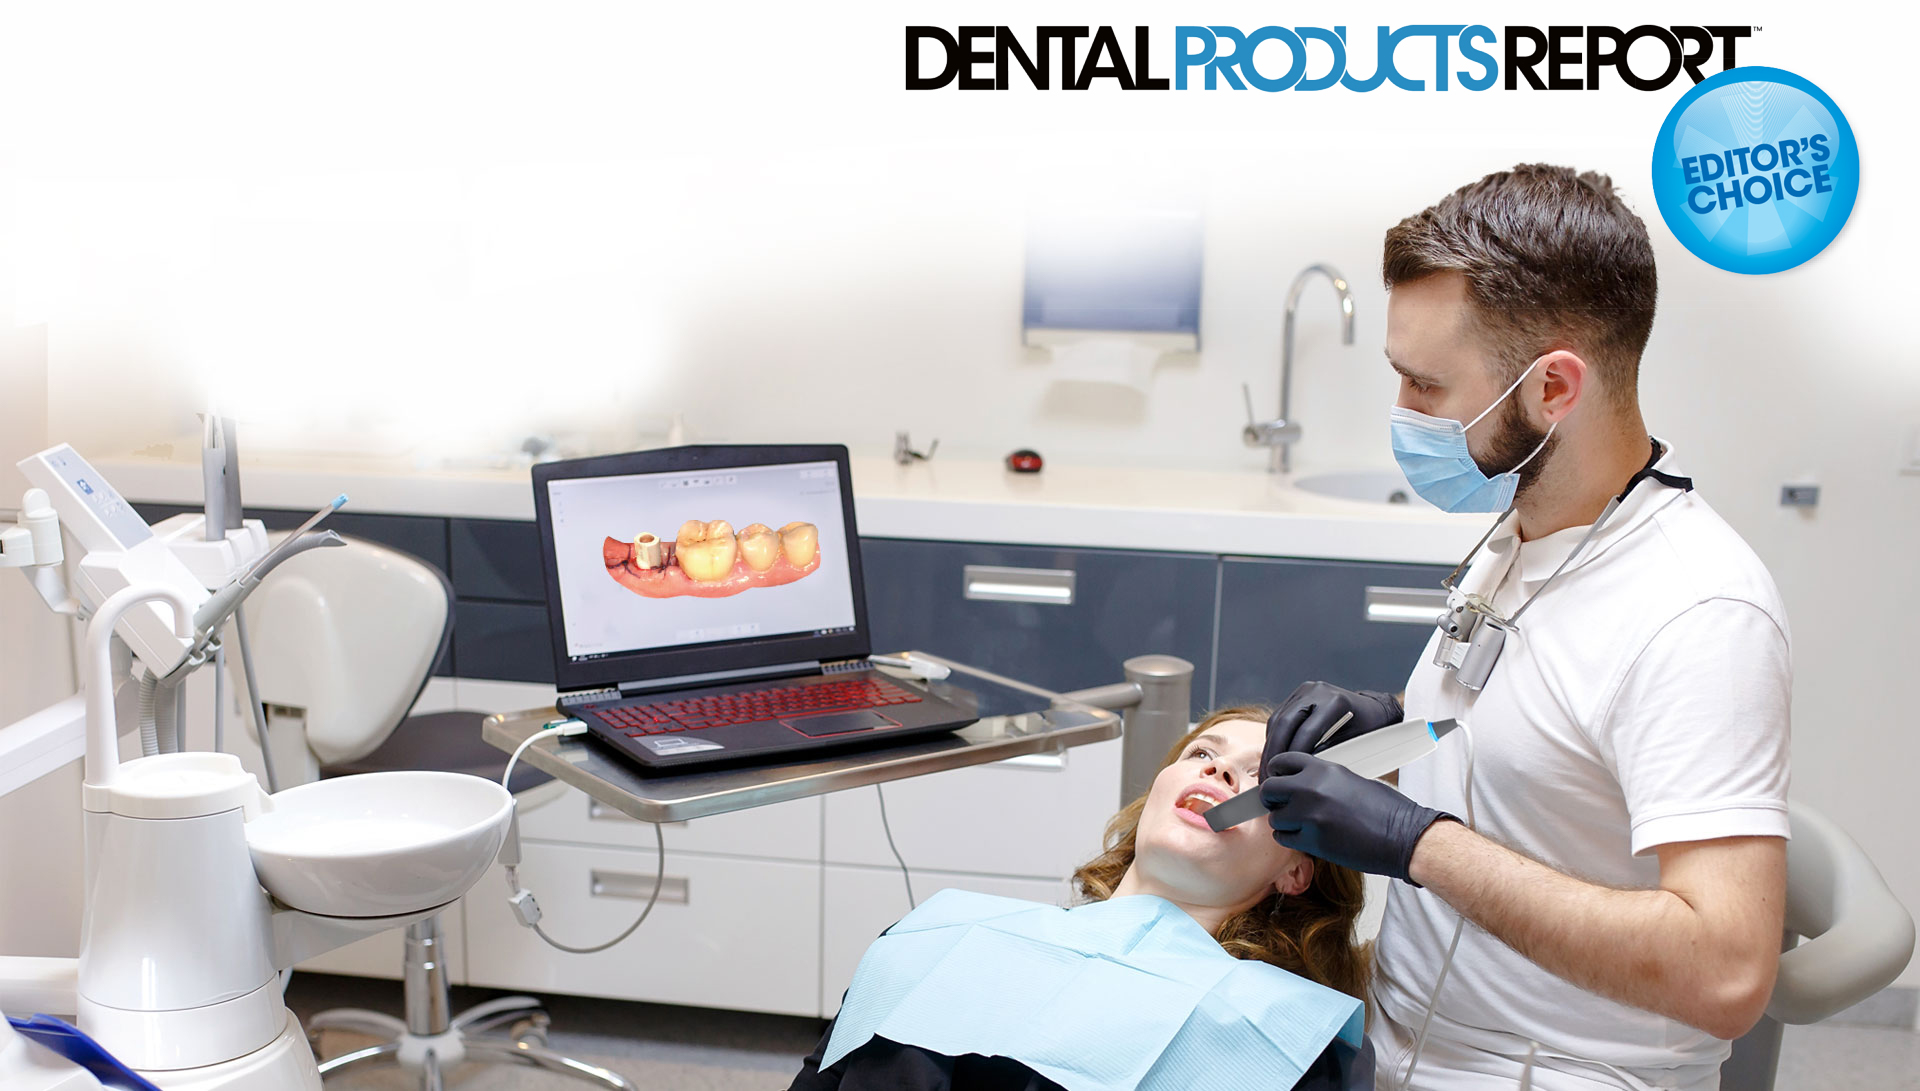 Intelliscan 3D, Dental Products Report Editor's Choice